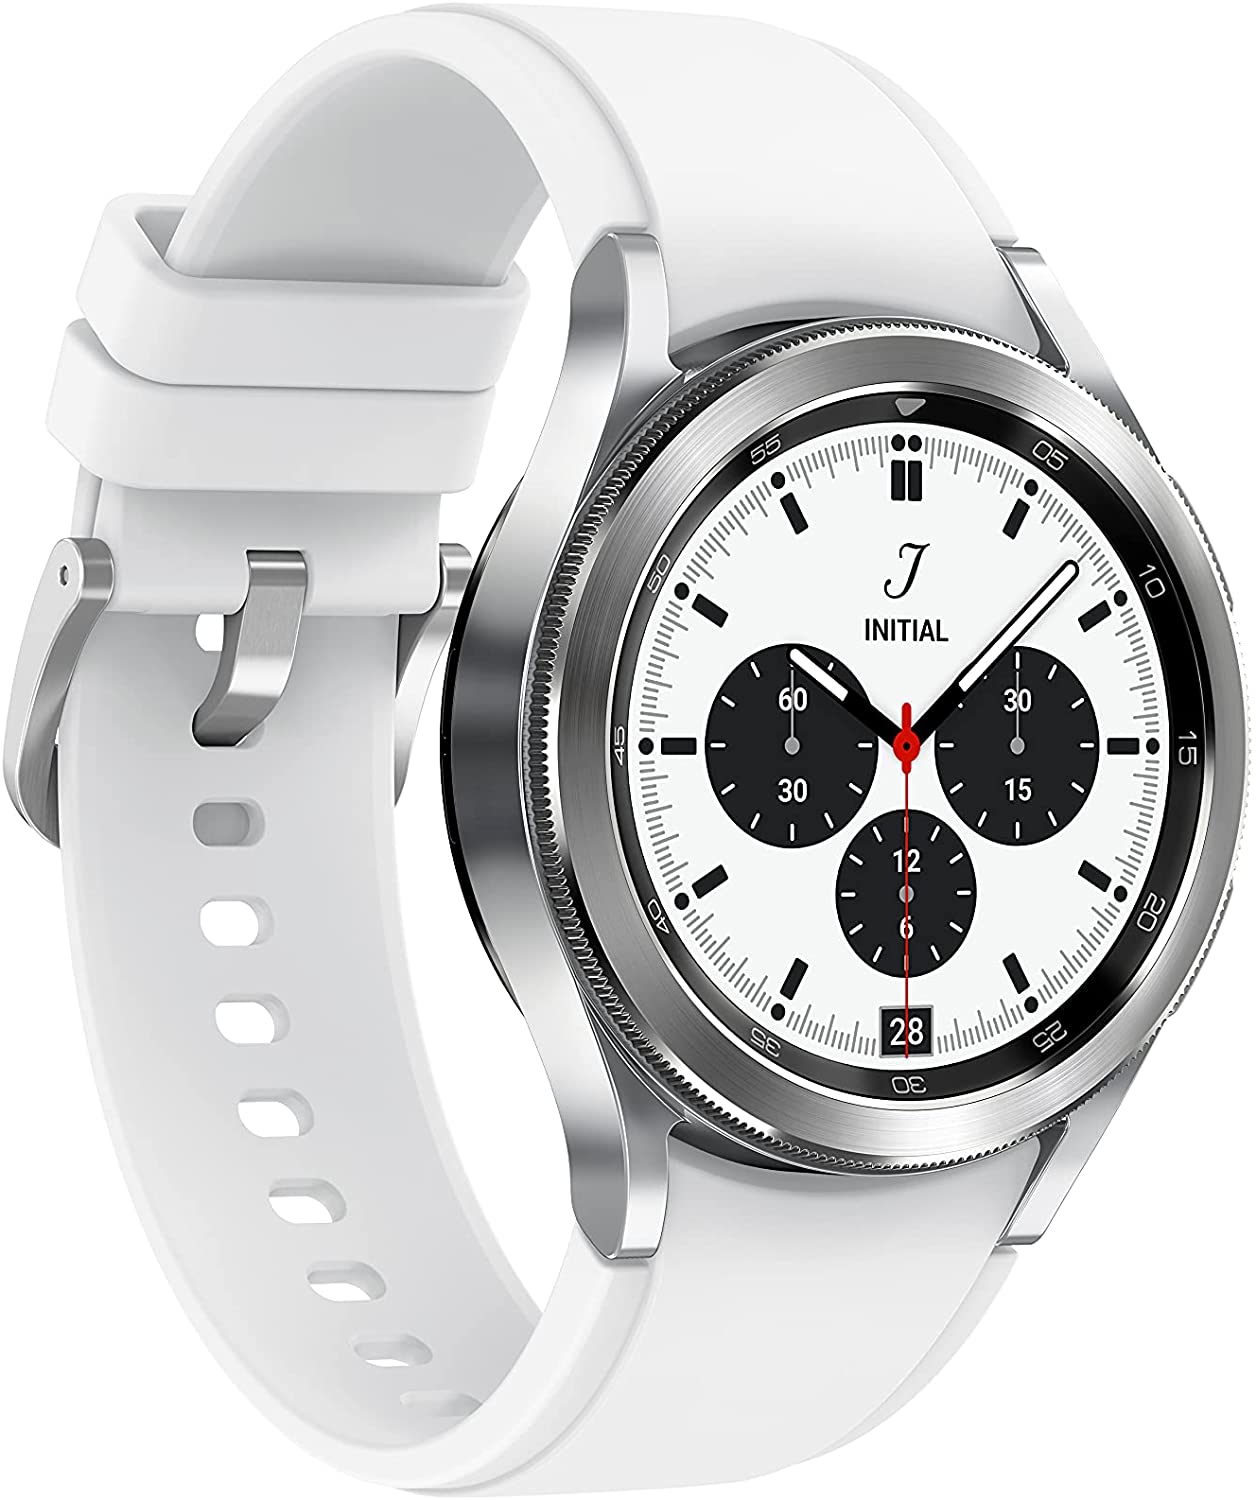 Samsung Galaxy Watch Classic Features, (LTE) 4 Geeky Full Pros Cons Price, (46mm) and Wrist Specifications, 